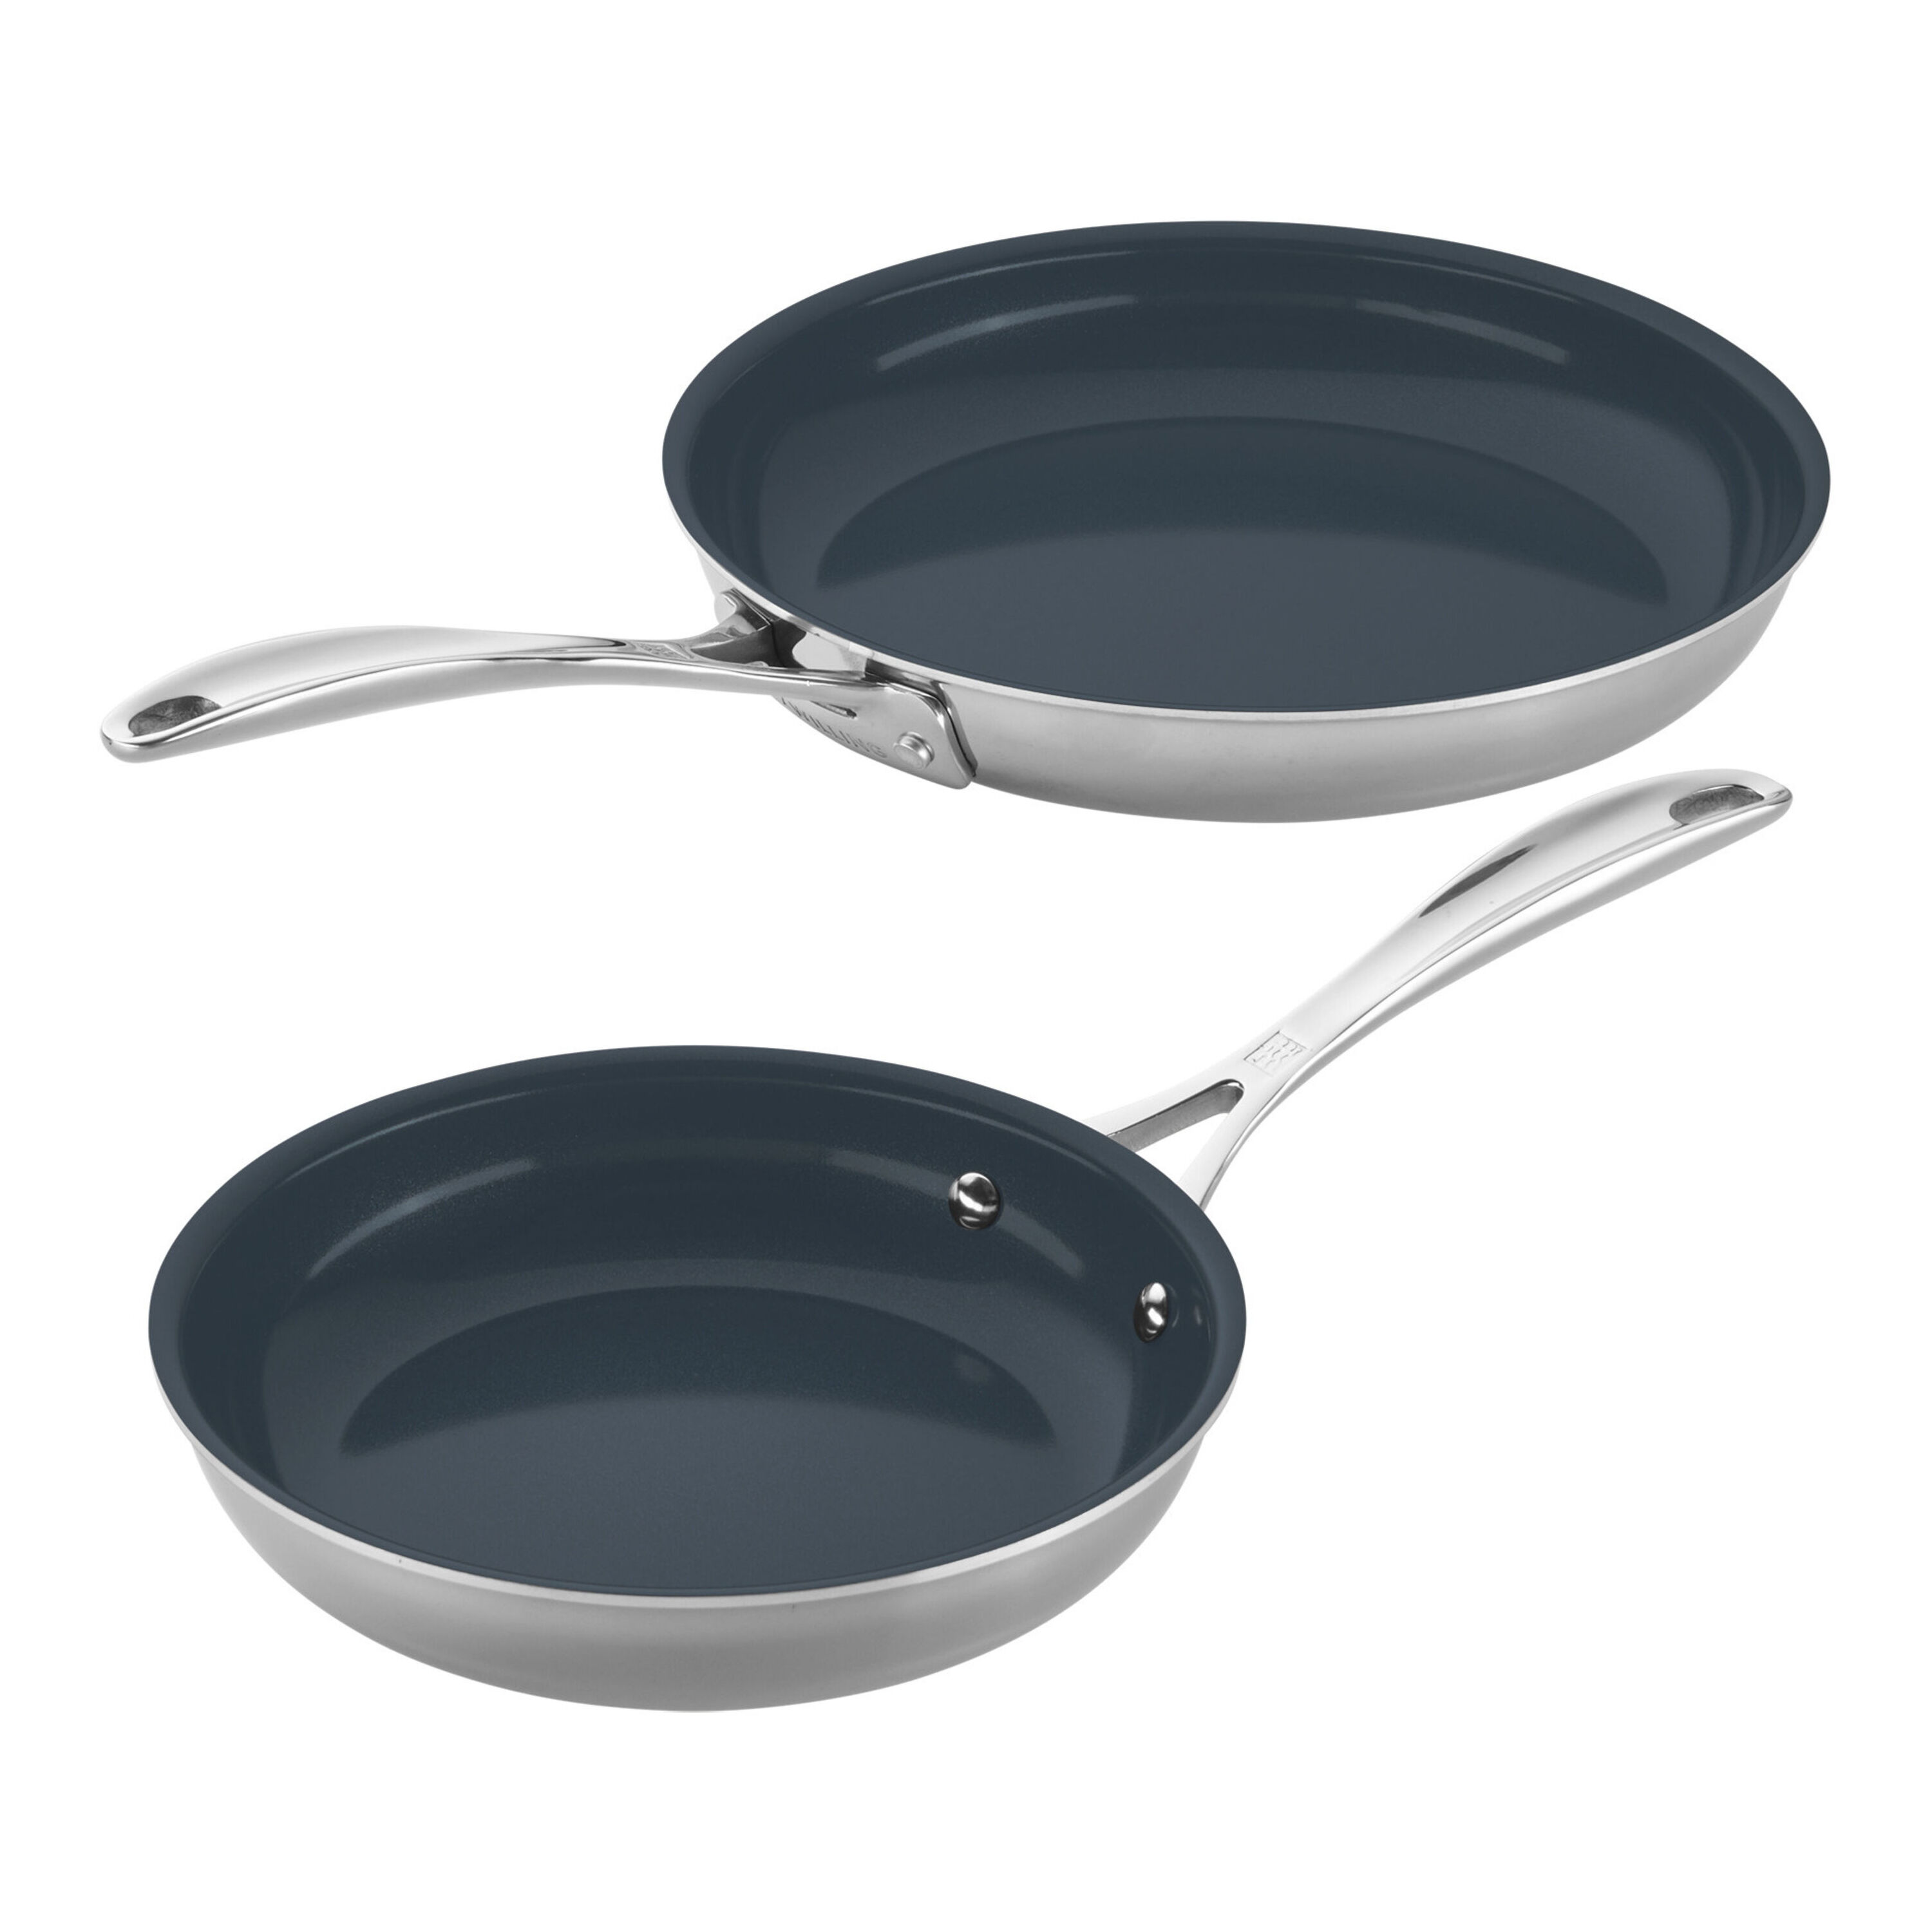 ZWILLING Clad CFX 2-pc, stainless steel, Ceramic, Non-stick, Frying pan set